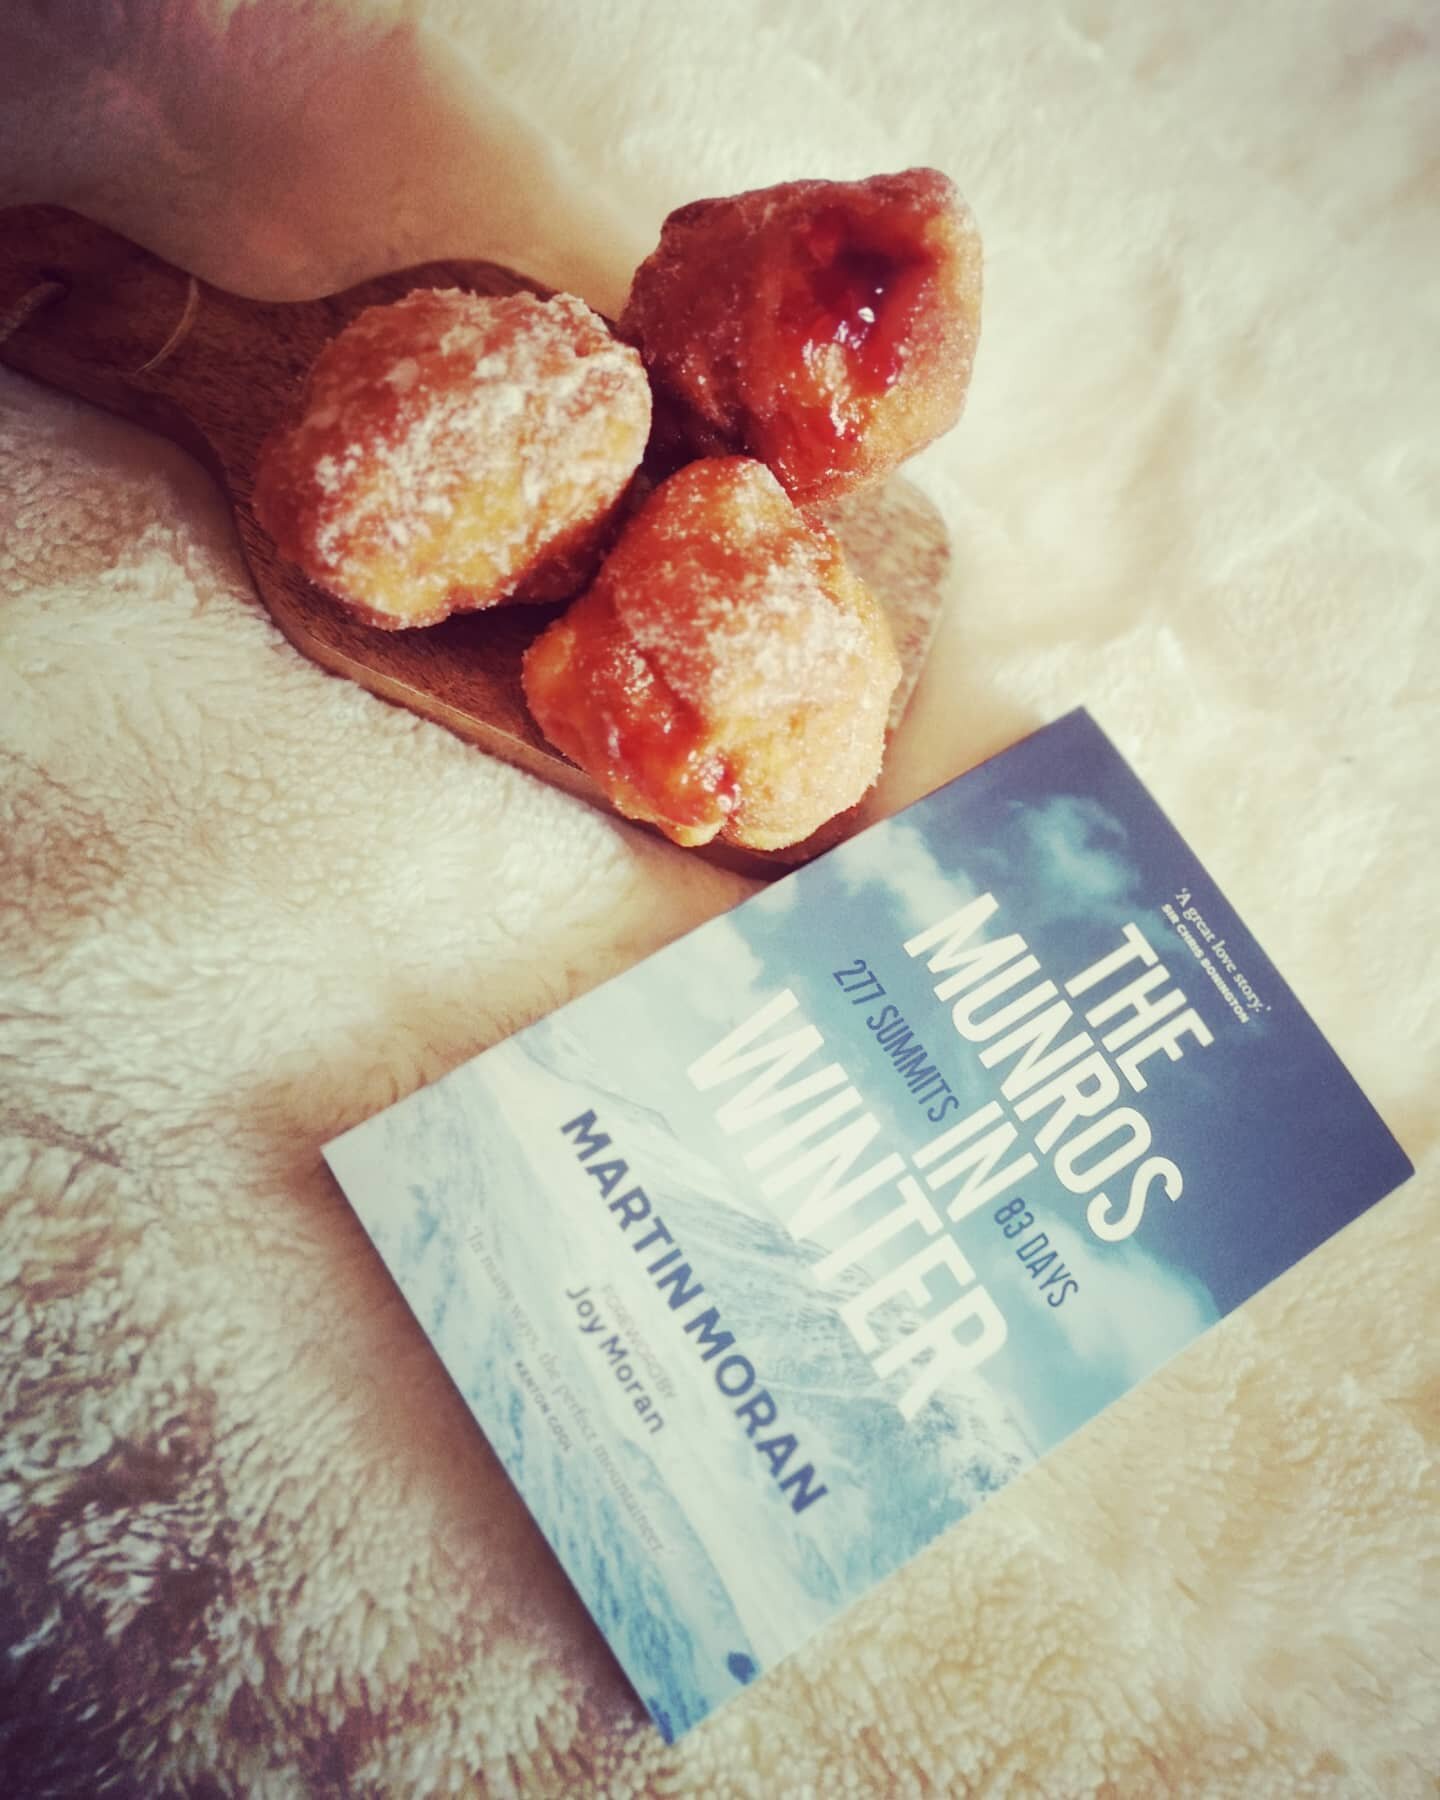 #sunday is a day for starting a new #book &amp; inhaling some #homemade #doughnuts 

I only got to meet Martin once but his love and passion for the mountains, as well as the love for his family has left a lasting impact on me which I'll never forget